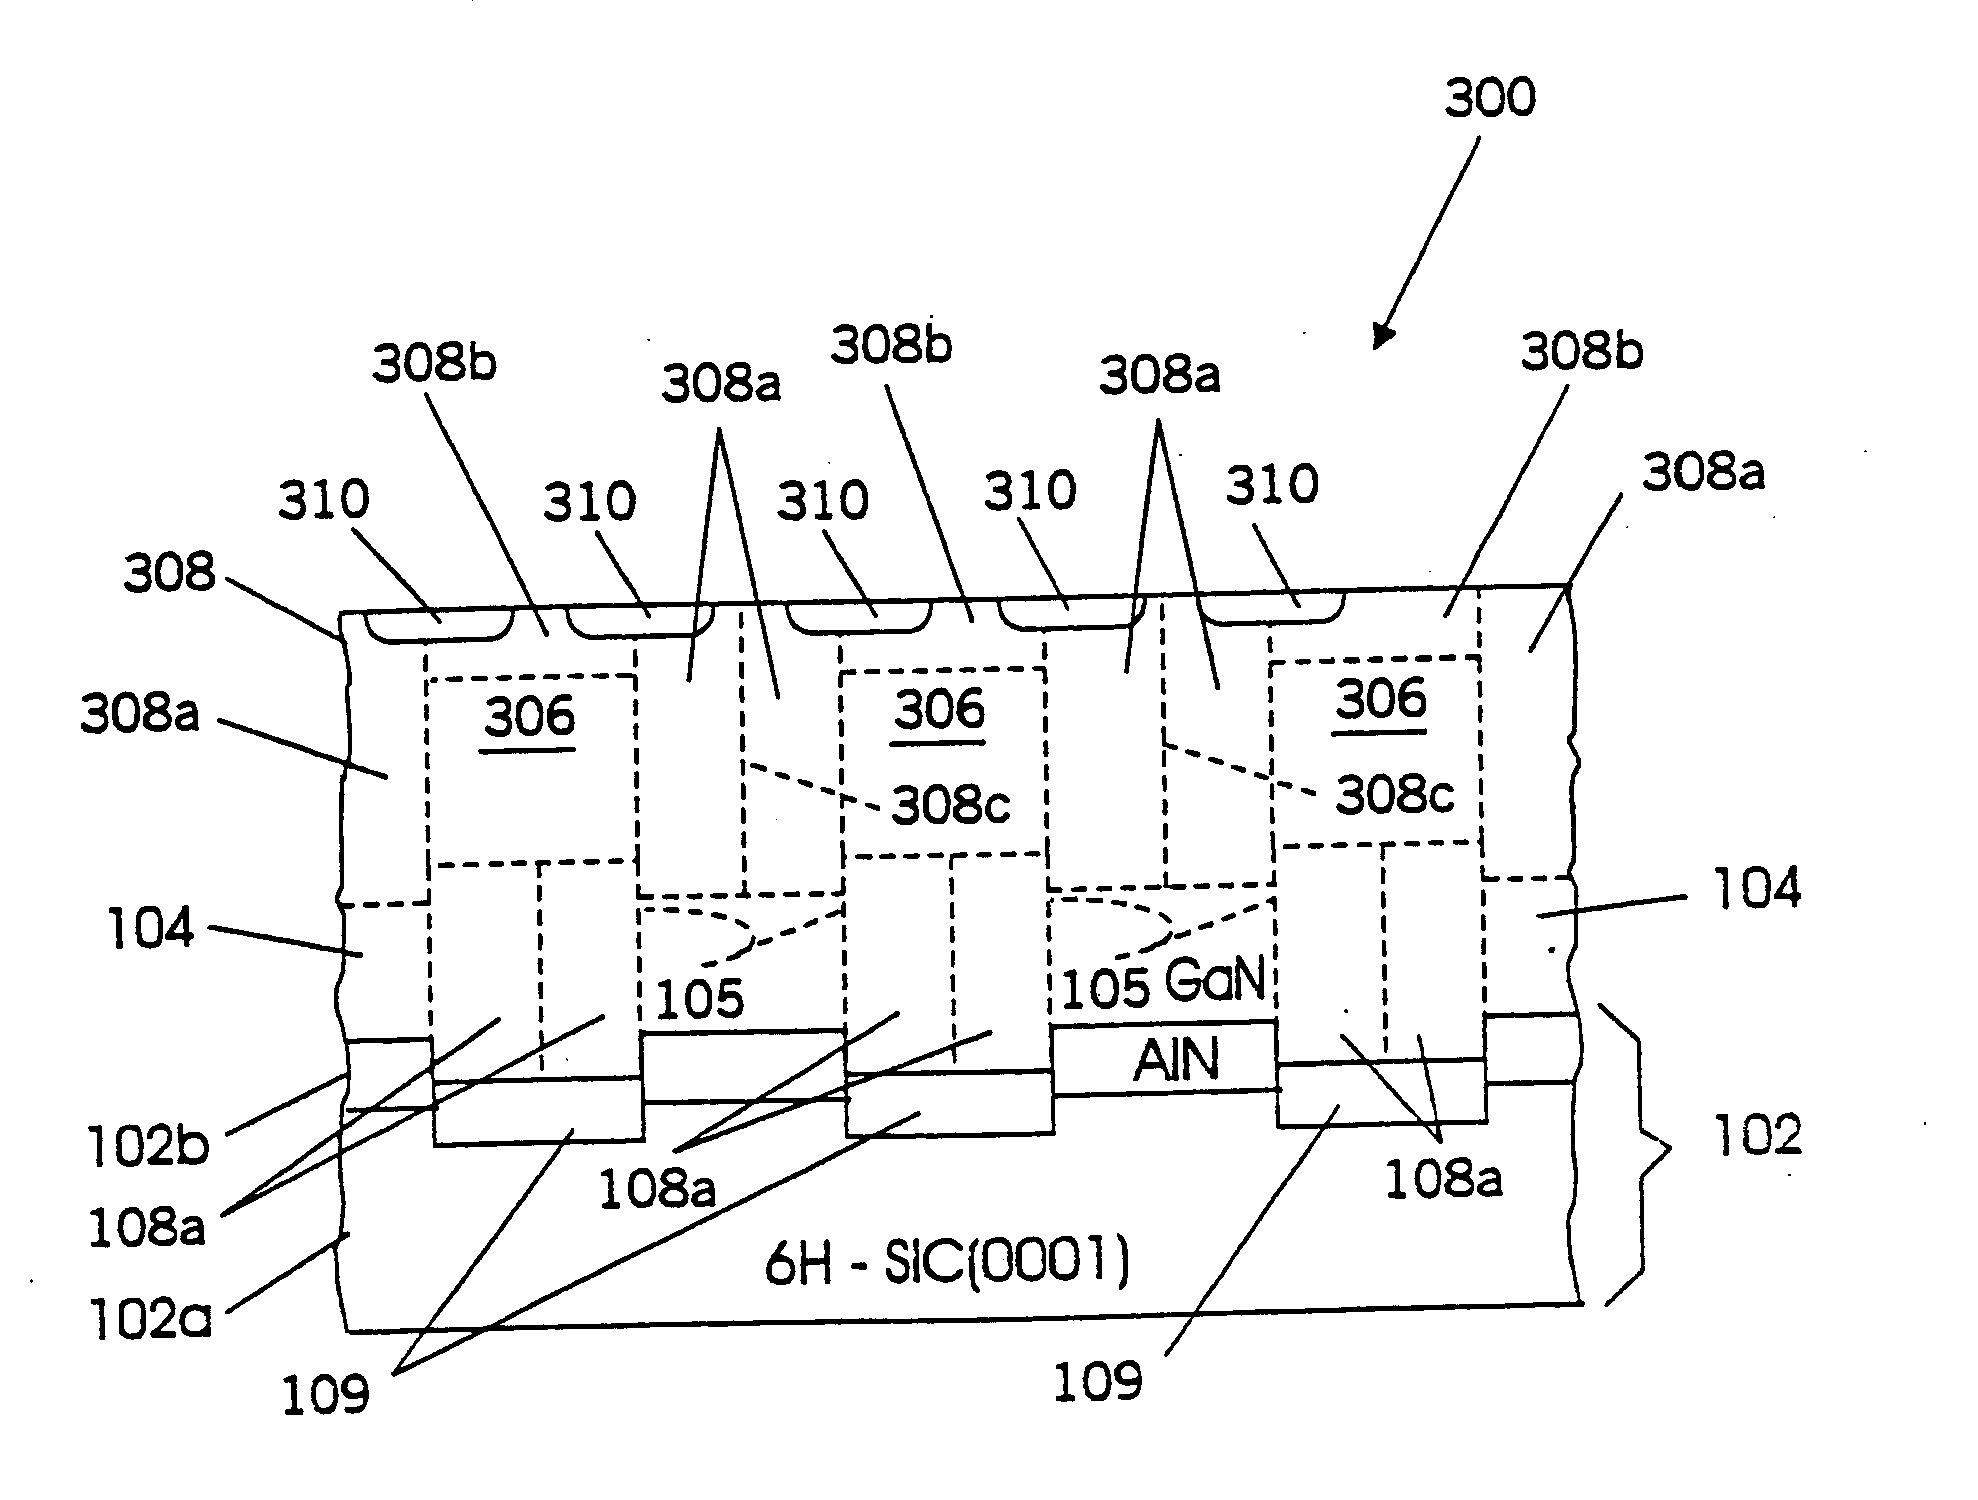 Methods of fabricating gallium nitride semiconductor layers by lateral growth into trenches